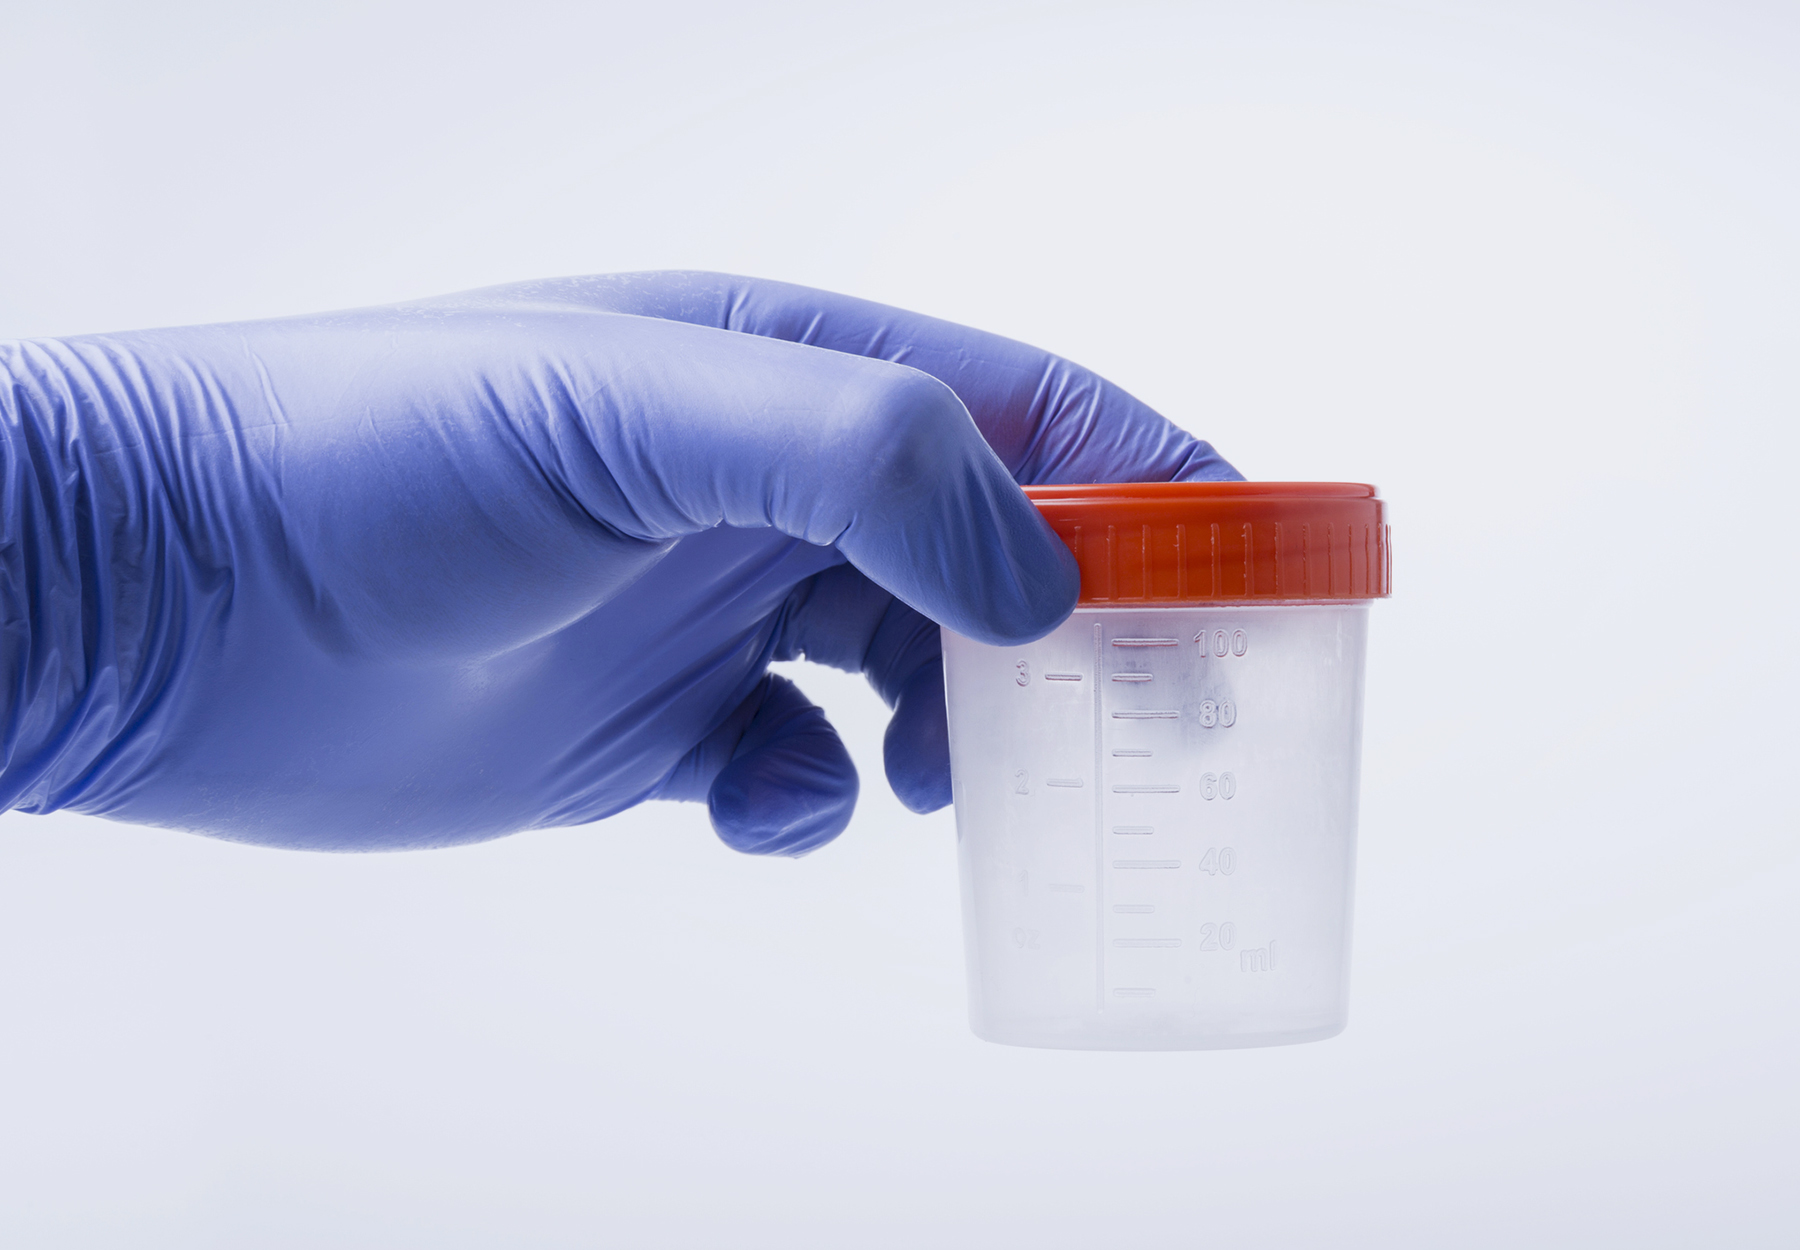 Hand wearing a purple medical glove holds an empty urine sample container. Stock image.